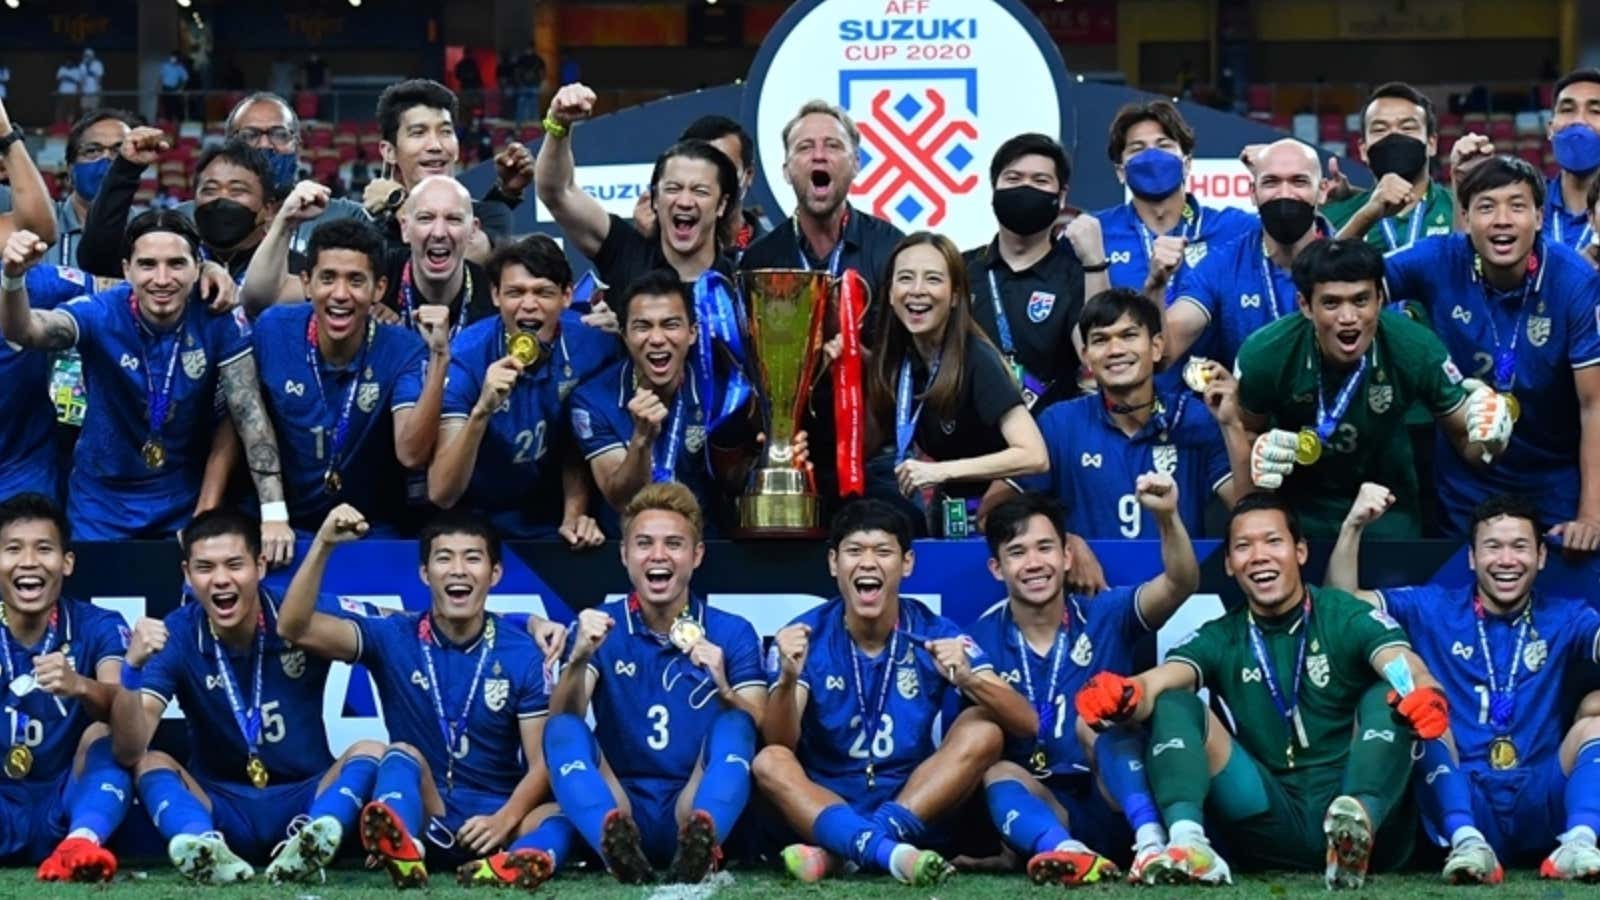 AFF Suzuki Cup champions: Every single AFF Championship winner from 1996  until 2018 | Goal.com